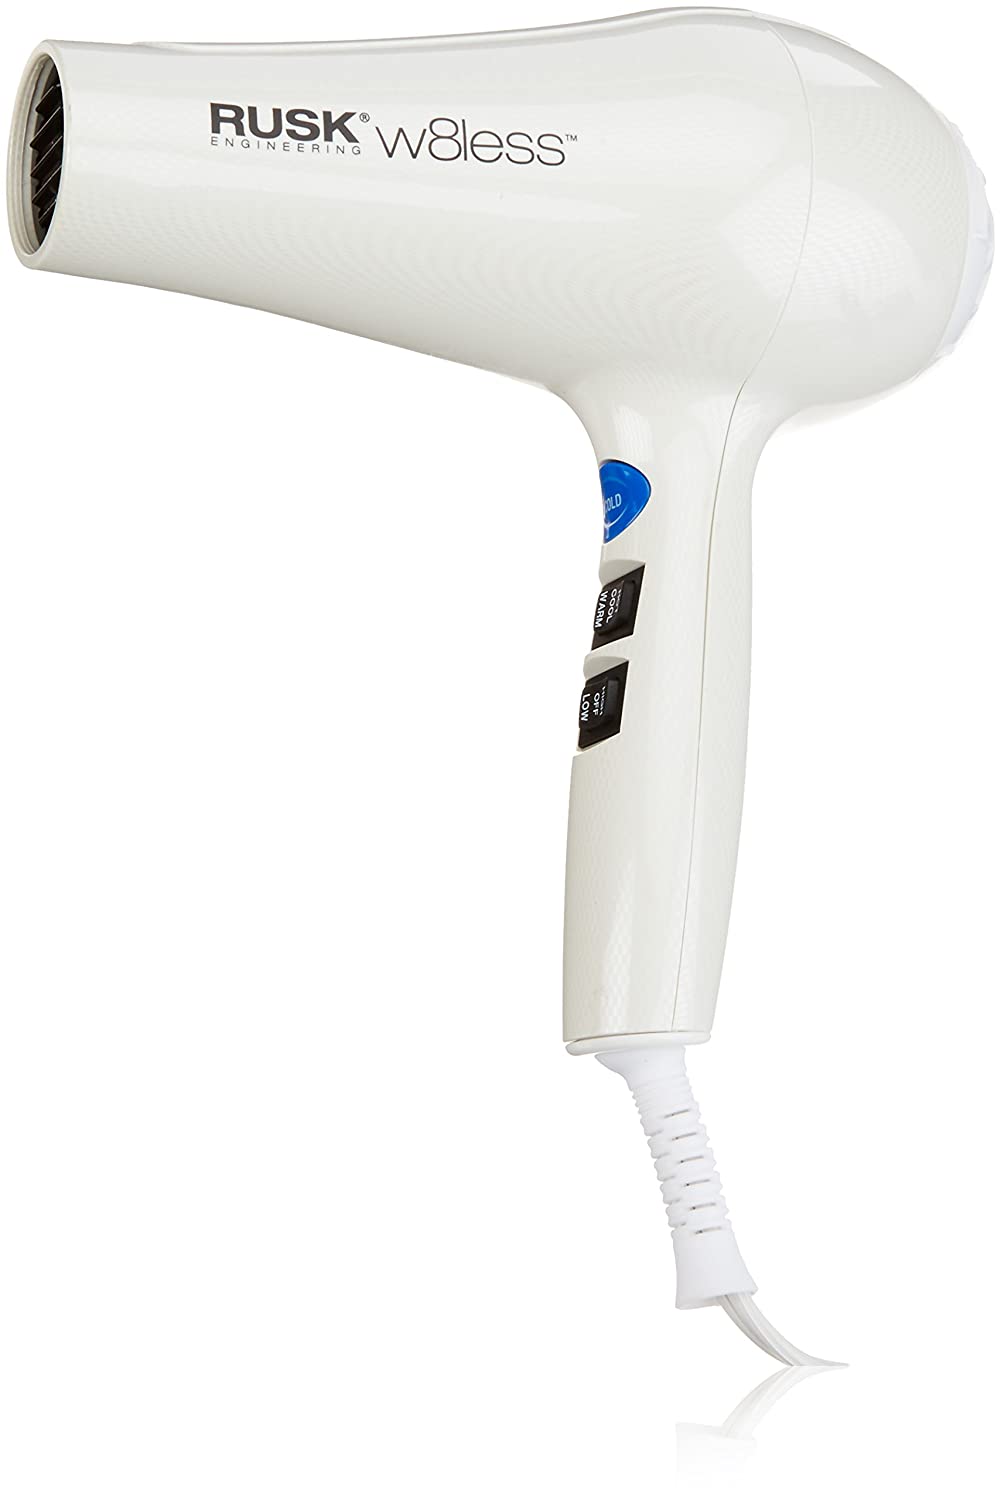 Review of RUSK Engineering W8less Professional 2000 Watt Dryer